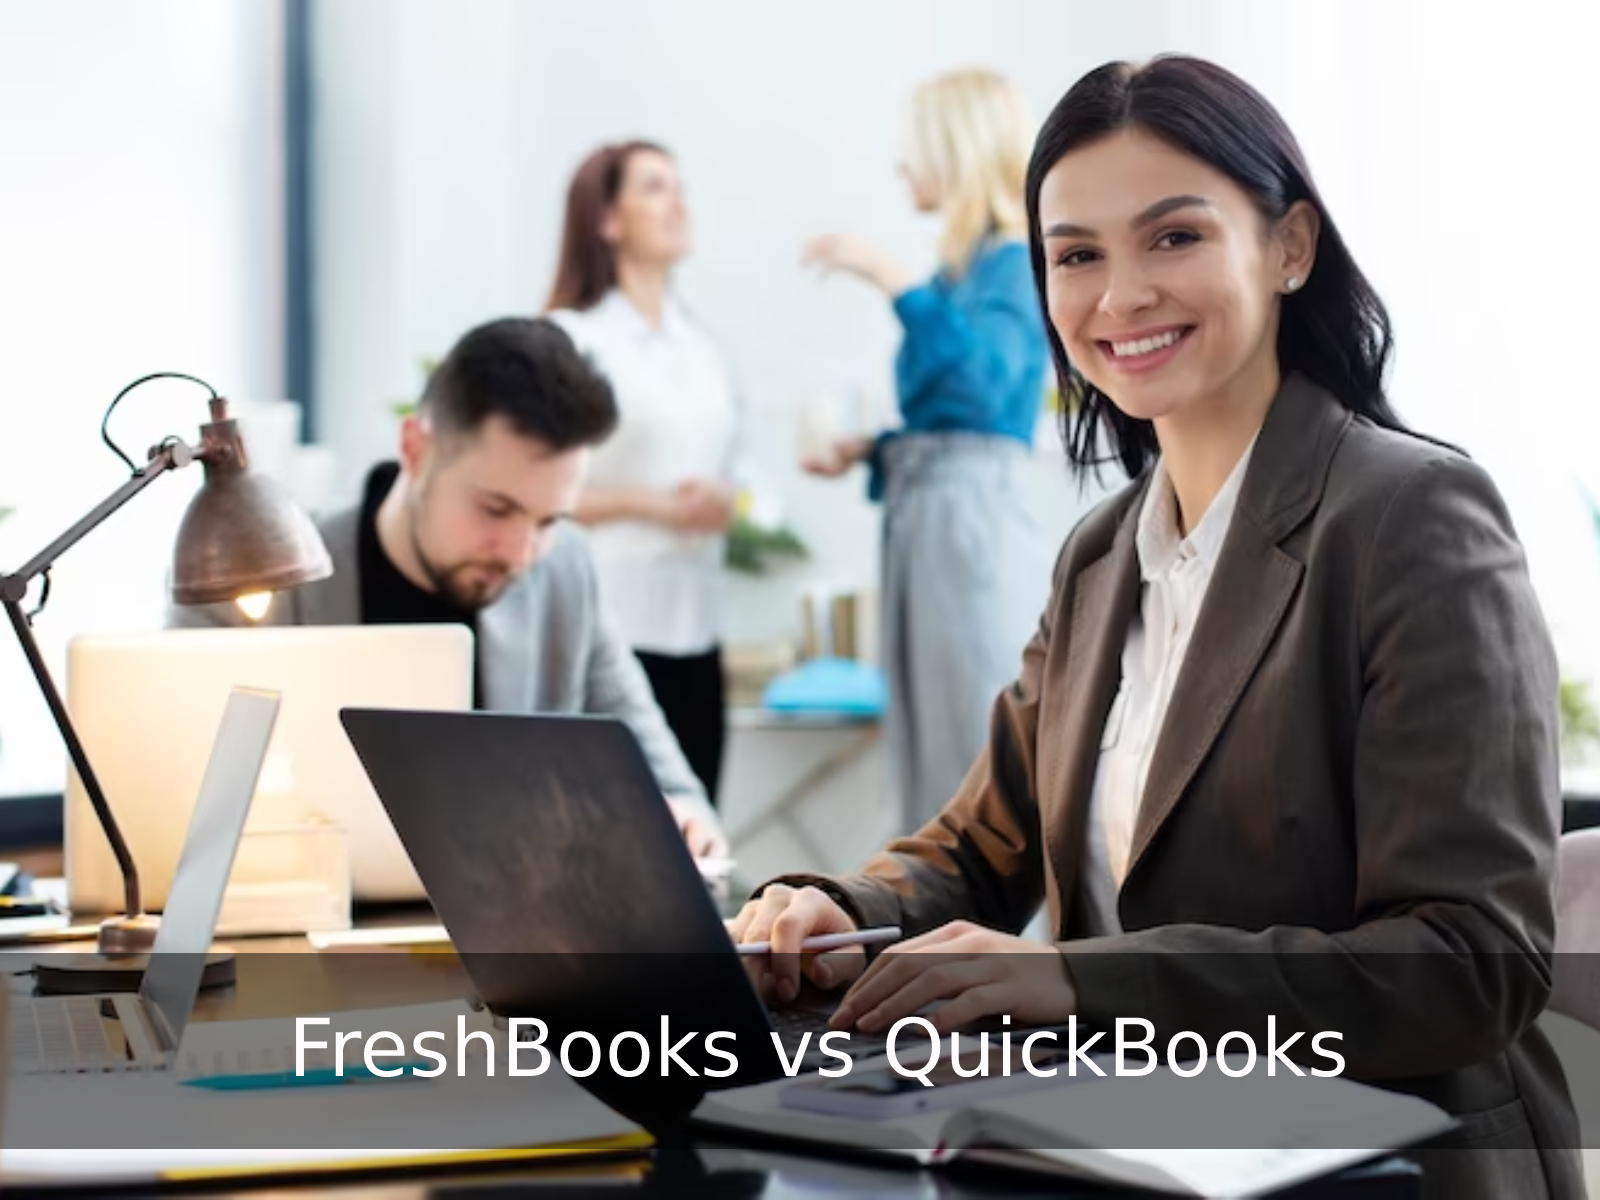 FreshBooks vs QuickBooks: Comparing Features, Pricing, and More